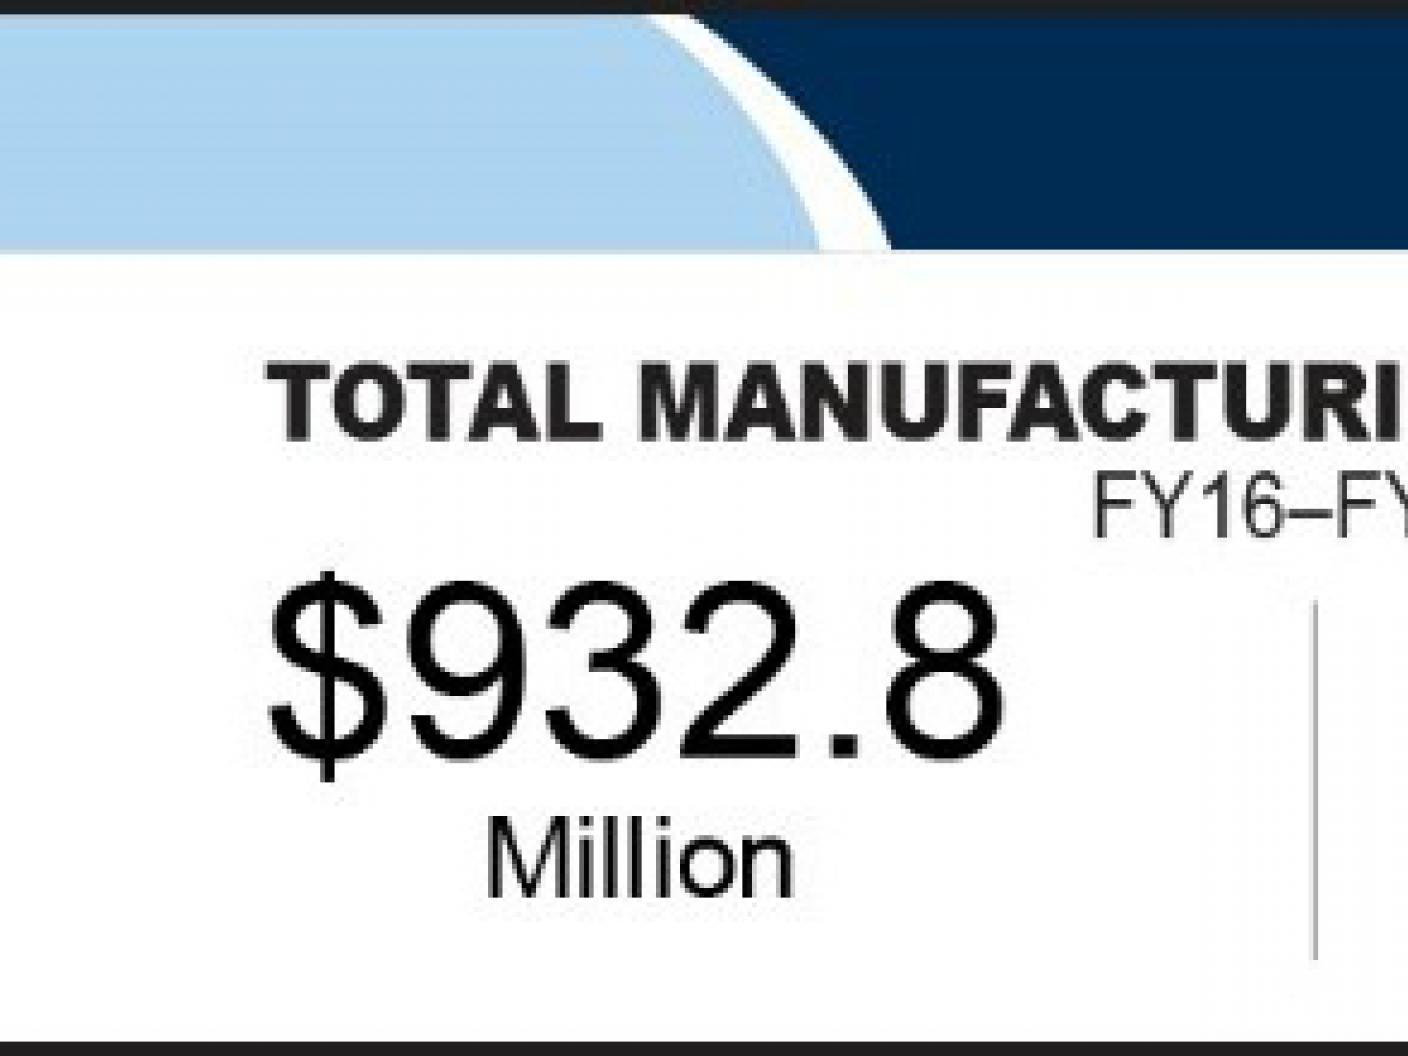 EDA's Impact: Total Manufacturing Investments for Fiscal Year 18 to Fiscal Year 2021 - $932.8, 713 projects